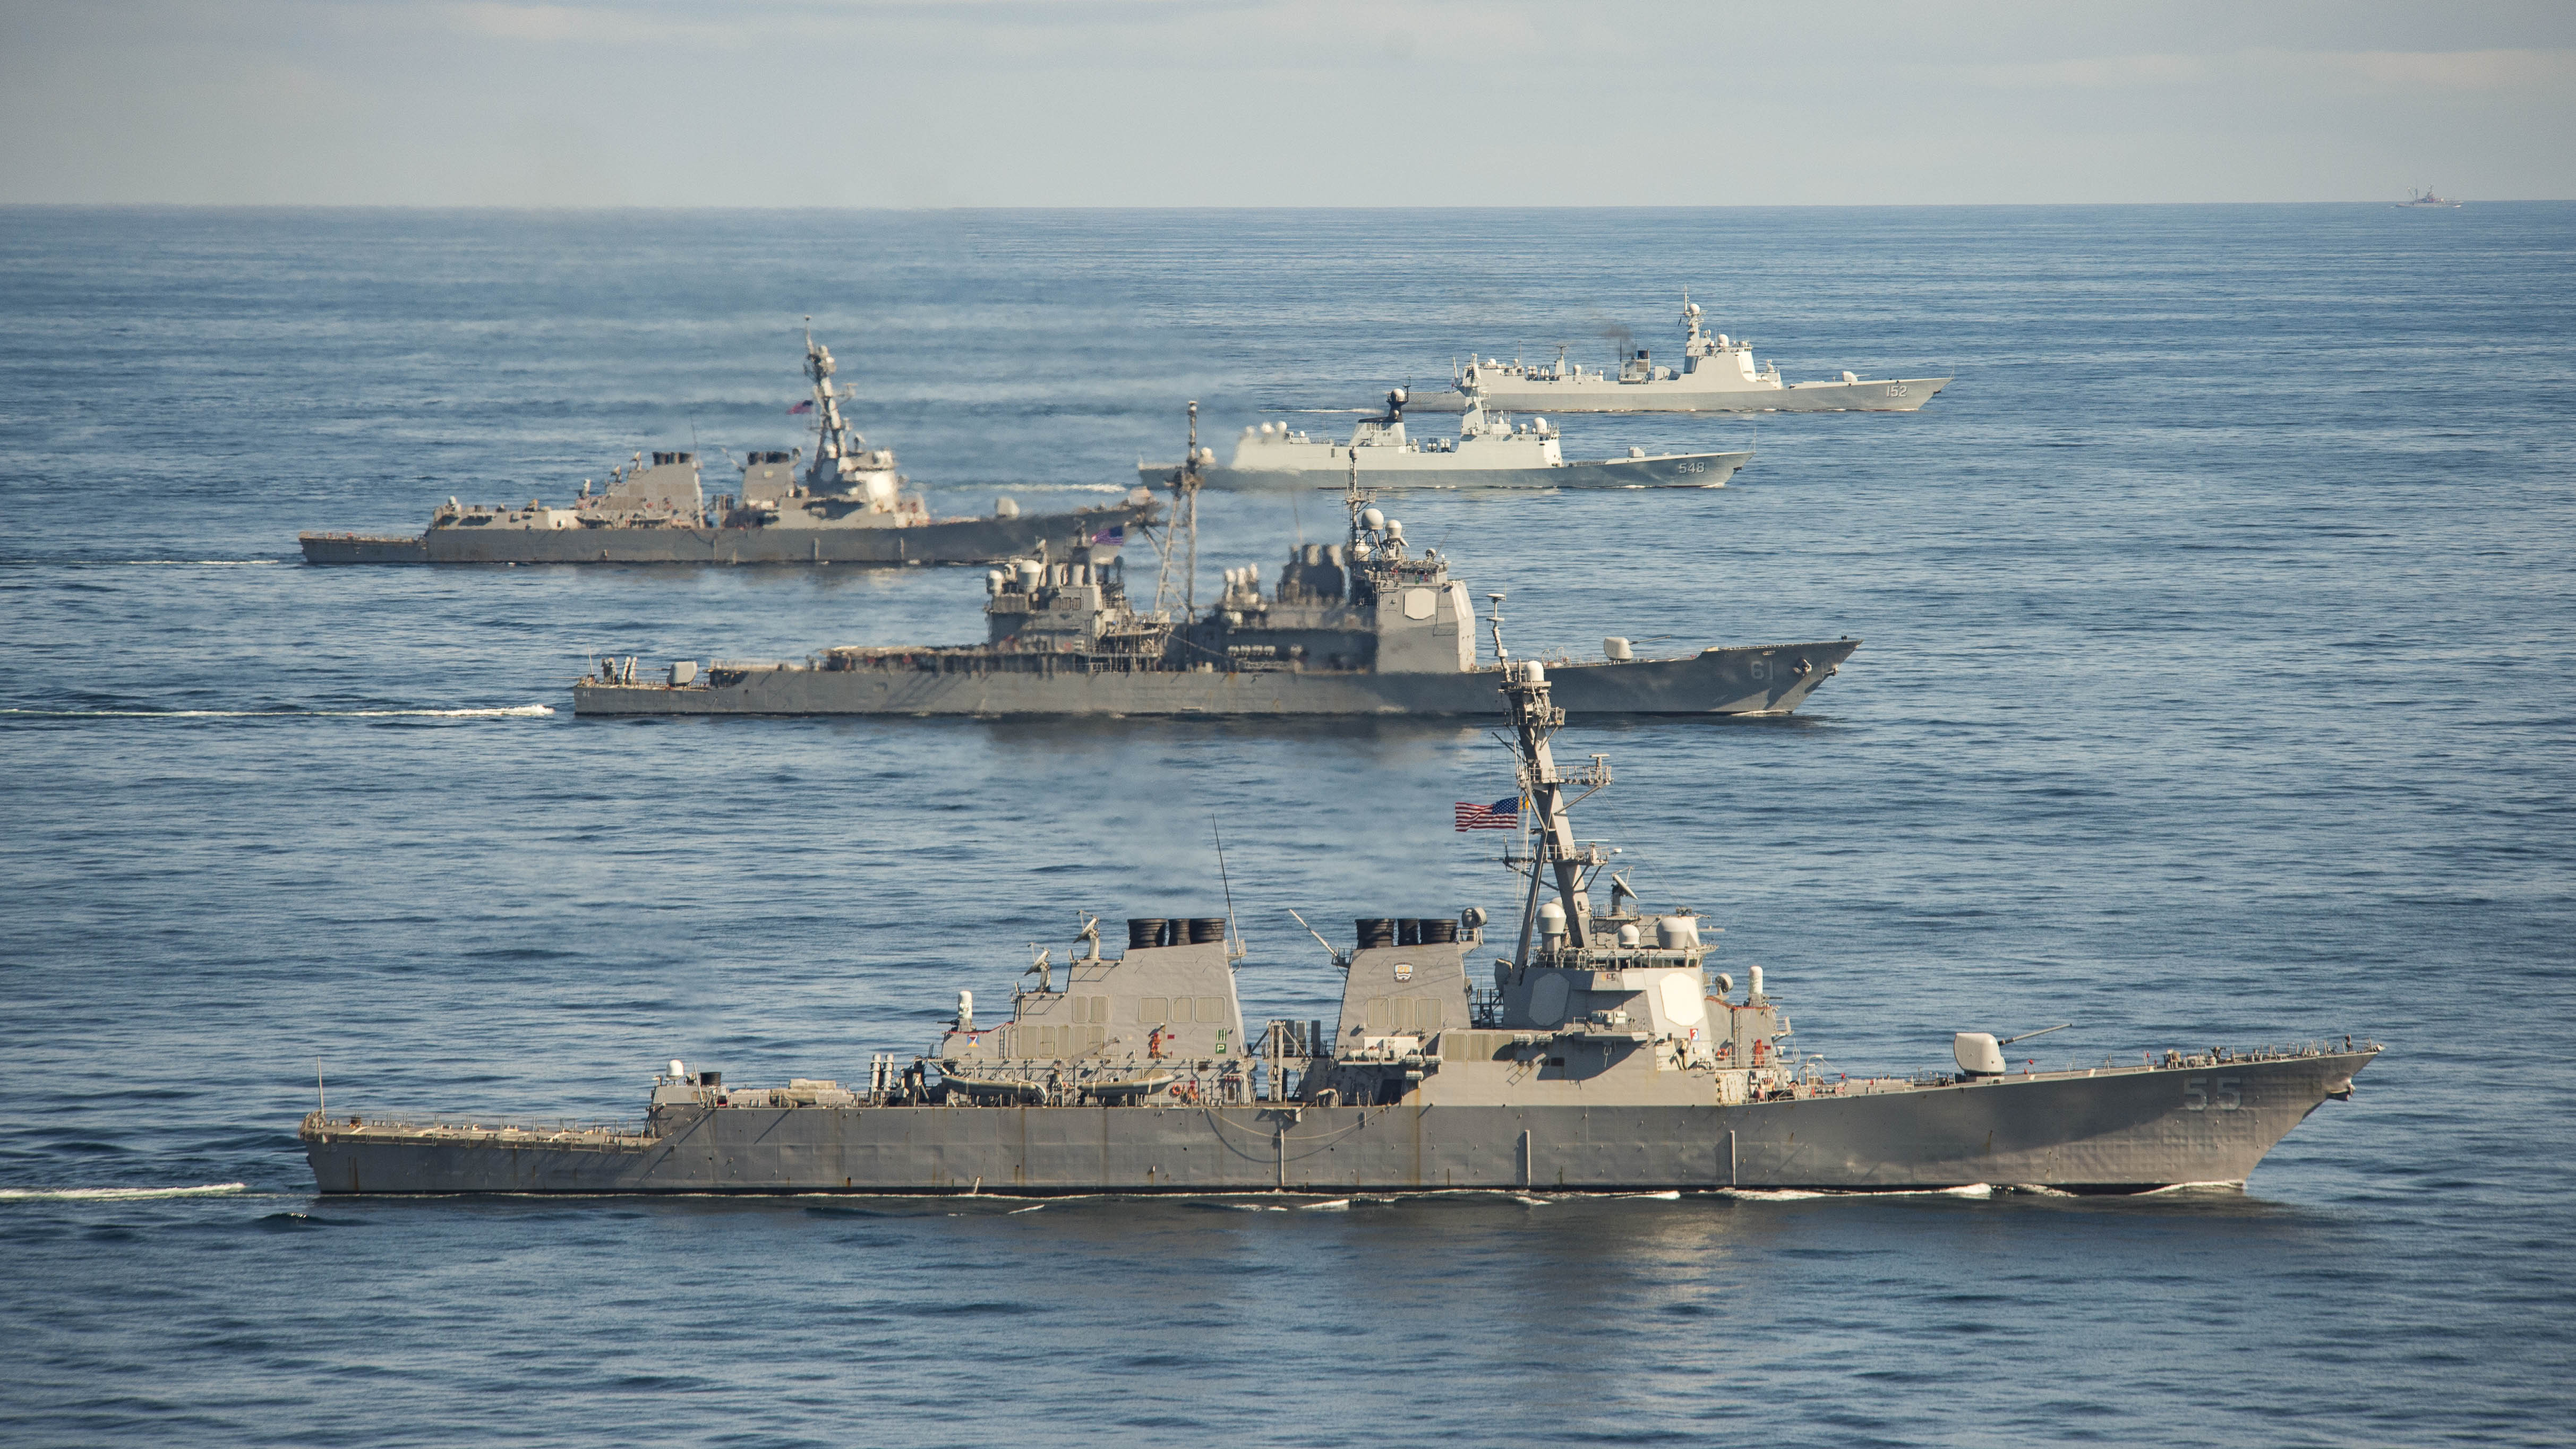 The Chinese Luyang II-class guided missile destroyer Jinan (DDG 152), top, the Jiangkai-class frigate Yiyang (FFG 548), the Arleigh Burke-class guided missile destroyer USS Mason (DDG 87), center, the Ticonderoga-class guided missile cruiser USS Monterey (CG 61) and the Arleigh Burke-class guided missile destroyer USS Stout (DDG 55), bottom, steam in formation during a passing exercise on Nov. 7, 2015, in the Atlantic Ocean. US Navy photo.